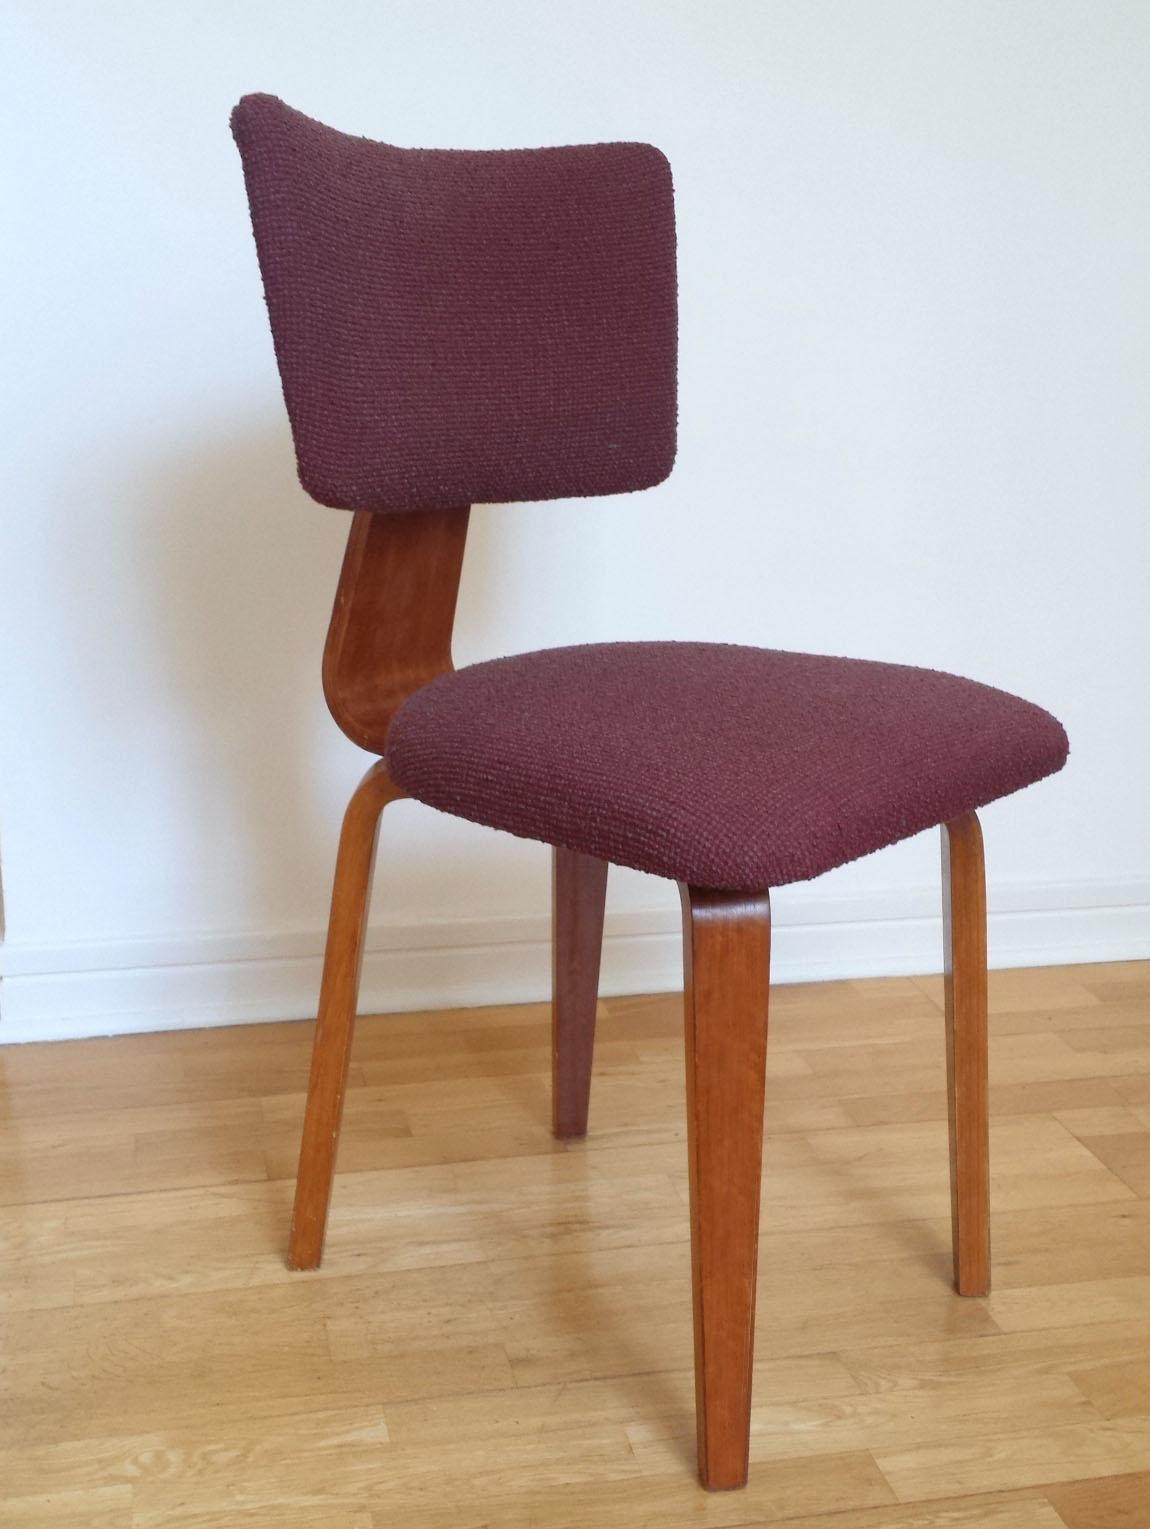 Set of four early 1950s blond wood bent ply chairs reupholstered in dark aubergine red bouclé wool fabric are designed by Cor Alons & J.C.Jansen 1949, produced by C.den Boer's Meubelfabrieken NV / Gouda.